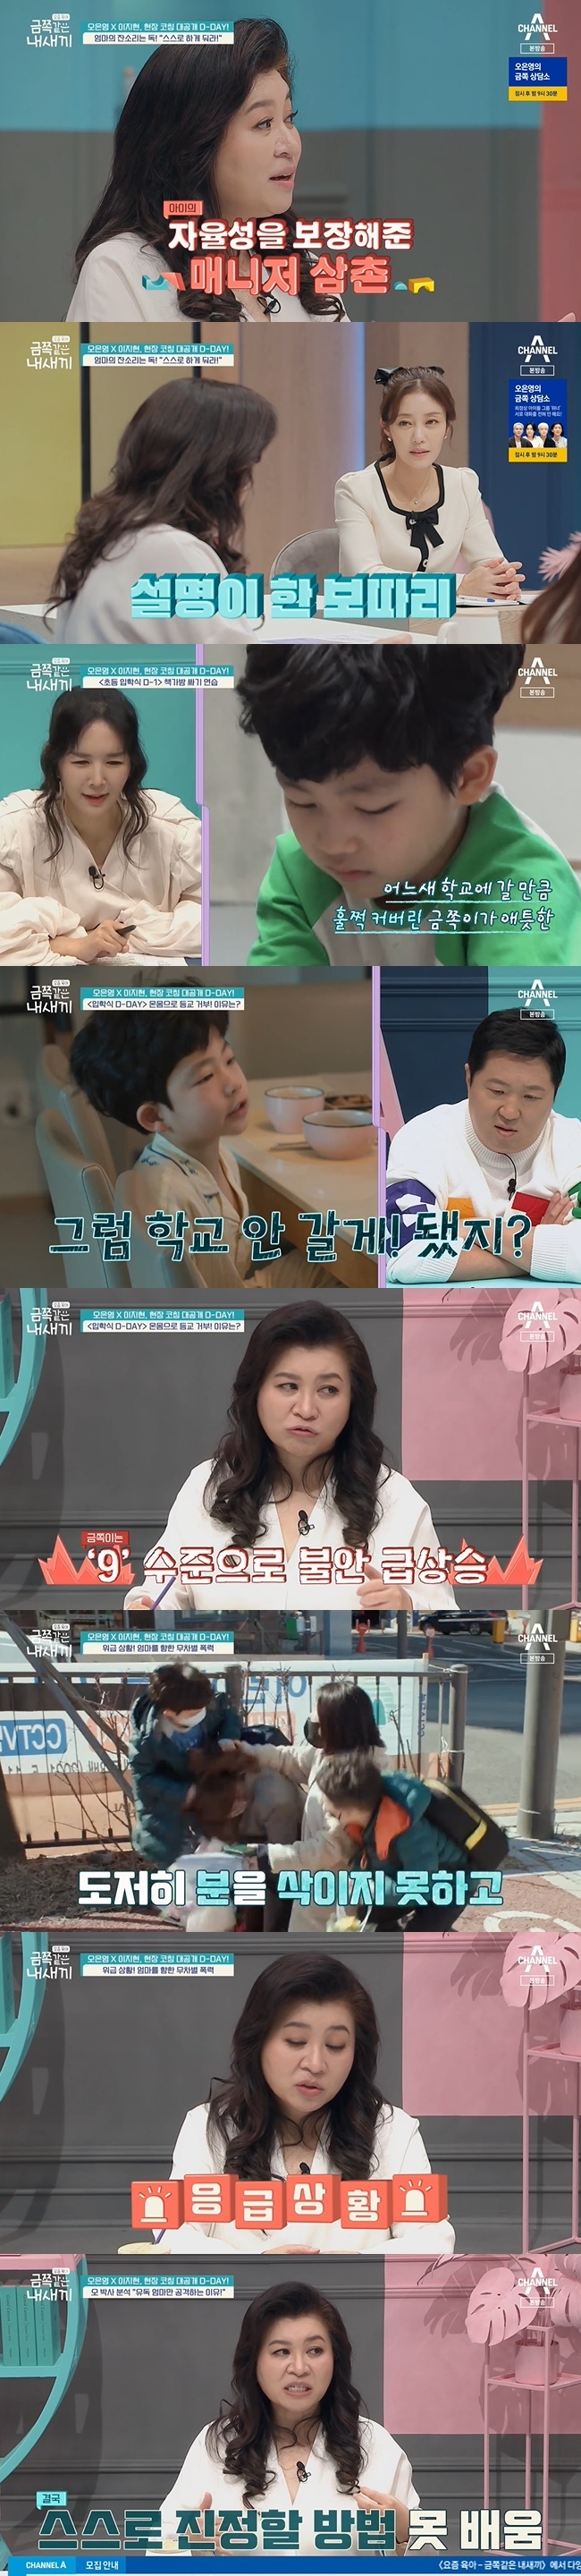 Lee Ji Hyun son showed the simplicity of change thanks to Oh Eun Young Doctorates solution, which was on-site coaching in about eight years.Channel A Parenting - My Kid like the Golden, which was broadcast on March 25, depicted Lee Ji Hyuns son who entered the Elementary School.Lee Ji Hyuns son surprised the performers by acting politely in front of the riding experience scene and manager.Oh Eun Young Doctorate analyzed that the manager guarantees the autonomy of the child and encourages him to work, pointing out the behavior of Lee Ji Hyun, who usually explains too much.Lee Ji Hyun practiced packing a backpack with her daughter and prepared for Miris sons entrance to the Elementary School.However, on the day of his first school day, his son tried to bargain for him to hug him as soon as he got up and to play games on condition of school.Lee Ji Hyun persuaded him to just do it for 10 minutes with a short time left to go to school, but his son refused to go to school, changed clothes several times and even dressed.Oh Eun Young Doctorate said, Normally, children are nervous on the first day or week of entering school.If you look at a very comfortable state of zero, the normal children are 9 when they say that the tension and anxiety are 2 to 3 when the environment changes.The new attempt itself induces a great sense of anxiety for him. The son, who left school, broke the promise he had made with the Friend family and wrote a flock to another Friend.When Lee Ji Hyun refused to listen to his opinion, the son eventually exploded, kicking at his mother on the road, and even grabbed his hair.Oh Eun Young Doctorate said, Whatever the reason is, it is actually an emergency to hit others and react with aggressive behavior.It is called an emergency in our department, he said. Gold is a king who is nervous and anxiety is getting higher before the start of new things.He wants Anxiety to be lowered to his proposed How, which is too leading. He said that every time he resolves excessive tensions, he is in a mess.Oh Eun Young Doctorate has made the field appearance in about eight years to understand the nature of his son Lee Ji Hyun.Lee Ji Hyun kept and waited for safety distances, following advice from Oh Eun Young Doctorate, to take control of discipline.Lee Ji Hyuns son, who was screaming with rough words, shook his mothers body and even kicked when her mother did not respond as usual.Oh Eun Young Doctorate grabbed Lee Ji Hyuns sons body and said firmly, You should never hit a person, but Lee Ji Hyuns son kicked Oh Eun Young Doctorate.In a consistent manner by Oh Eun Young Doctorate, Lee Ji Hyun son followed the instructions for the first time in 54 minutes, and even took his mothers hand and begged.The excited Lee Ji Hyun son left the job, shouting, All these people are useless.While the staff brought their son, Oh Eun Young Doctorate told Lee Ji Hyun, If you listen to your childs request, the control is on your child. Lee Ji Hyun followed Oh Eun Young Doctorates instructions again with tears.Oh Eun Young Doctorate ordered Lee Ji Hyun, who was trying to approach the child in tears, to do not beg for a plea.When the childs violence began again, Oh Eun Young Doctorate said, Remember how much you hurt your mother.Its not an apology to hit people. Its an act that hurts people. Its an act that you should never do.Dont tell me, wait, he said, his voice firm.Its not important to do math well and to get to hangul quickly, Oh Eun Young Doctorate said. Its a no-brainer to hit others.He is the son of Lee Ji Hyun, but he is a member of society. I can not see him hurting and hitting people like this.Im going to teach you this, and Im going to be dark today, Lee Ji-Hyun said with a prickly advice.In the mothers change and Oh Eun Young Doctorates determined attitude, Lee Ji Hyun son stopped crying and began to follow the instructions of the adults.Oh Eun Young Doctorate said, If you feel such a sorry heart, it is because it is bad for you.If you ask me to back away, I have to back away. When my mother does not answer, it is more important to teach you, not because she ignores or hates you.I cant just leave the act of hitting someone else, and Im more worried because I care about you.Lee Ji Hyuns son then approached his mother and apologized and greeted Oh Eun Young Doctorate politely when he went home.Lee Ji Hyun said, I thought the miracle had happened, and I thought I could blow up my five-piece for this miracle.Oh Eun Young Doctorate said, I learn self-regulation at the age of three.We should teach about the behavior that we should not do from this time. He advised me to reset the three-year-old as an additional prescription.Lee Ji Hyun said, I am so sorry that I could not teach my child more firmly.On the other hand, in the trailer released on the day, Lee Ji Hyuns daughter and gold sisters shocking psychological test result was predicted.